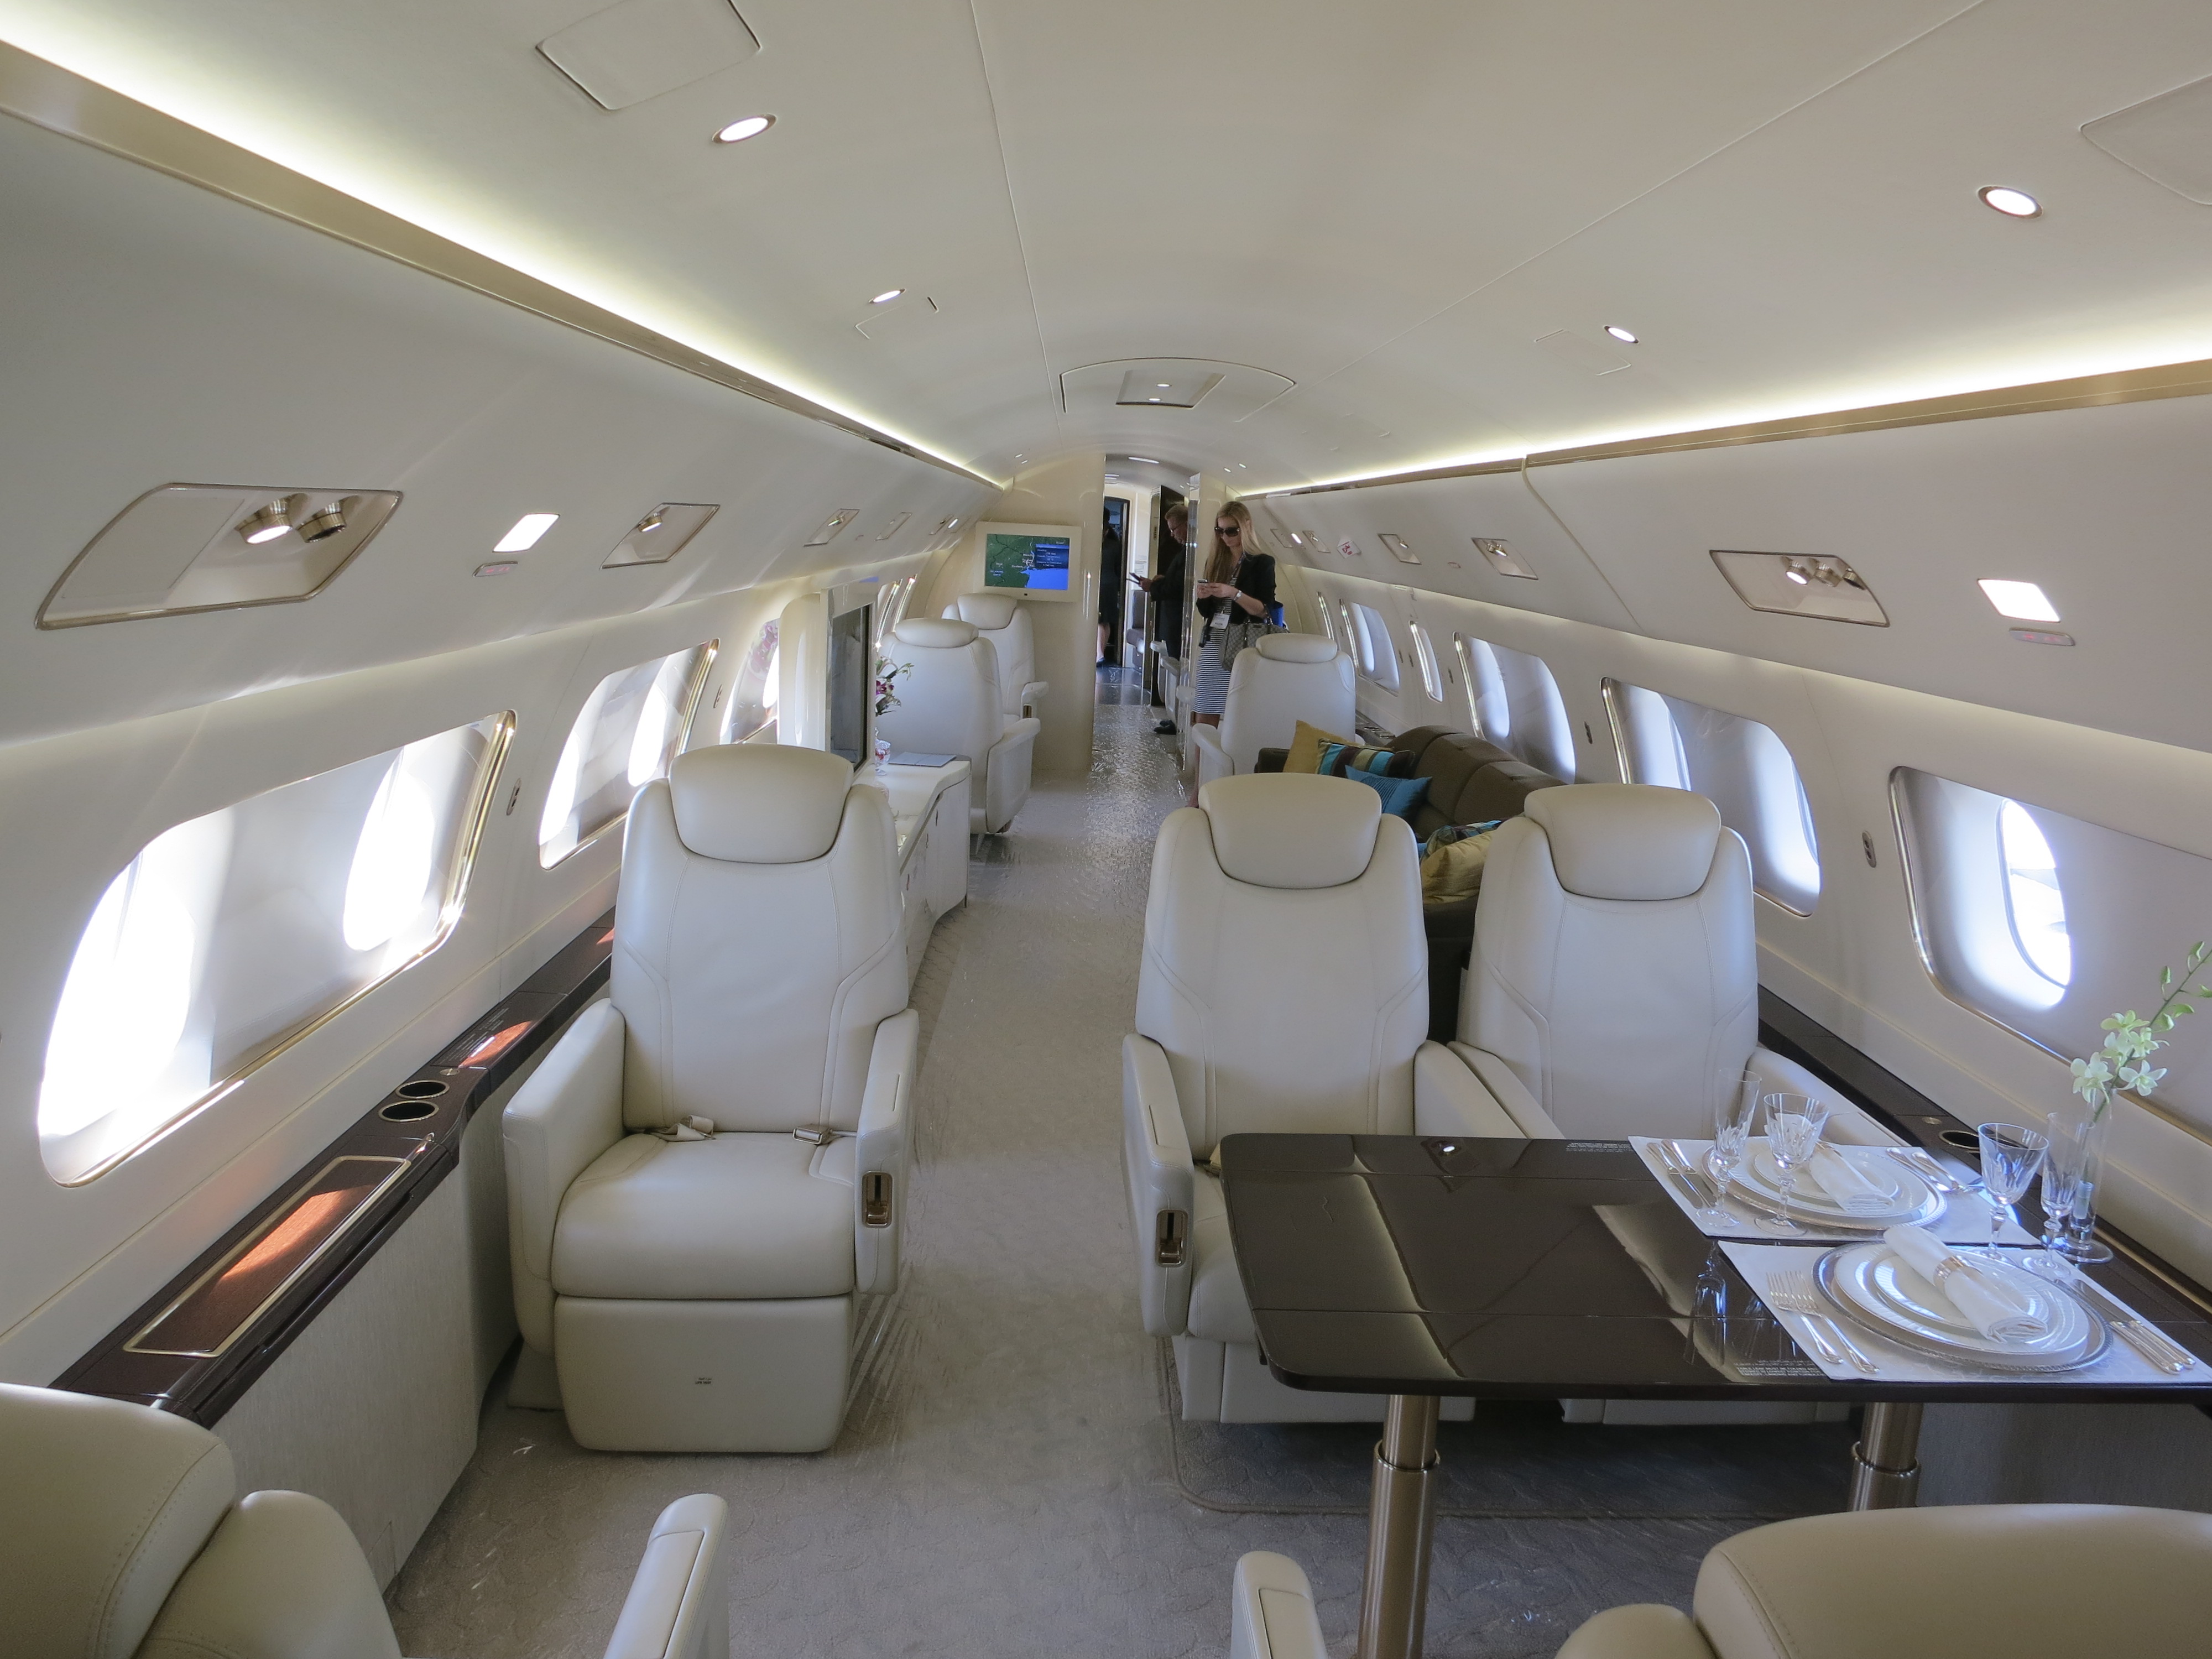 Unmatched Elegance: Recommendations for Creating a Truly Luxurious Private Jet Interior